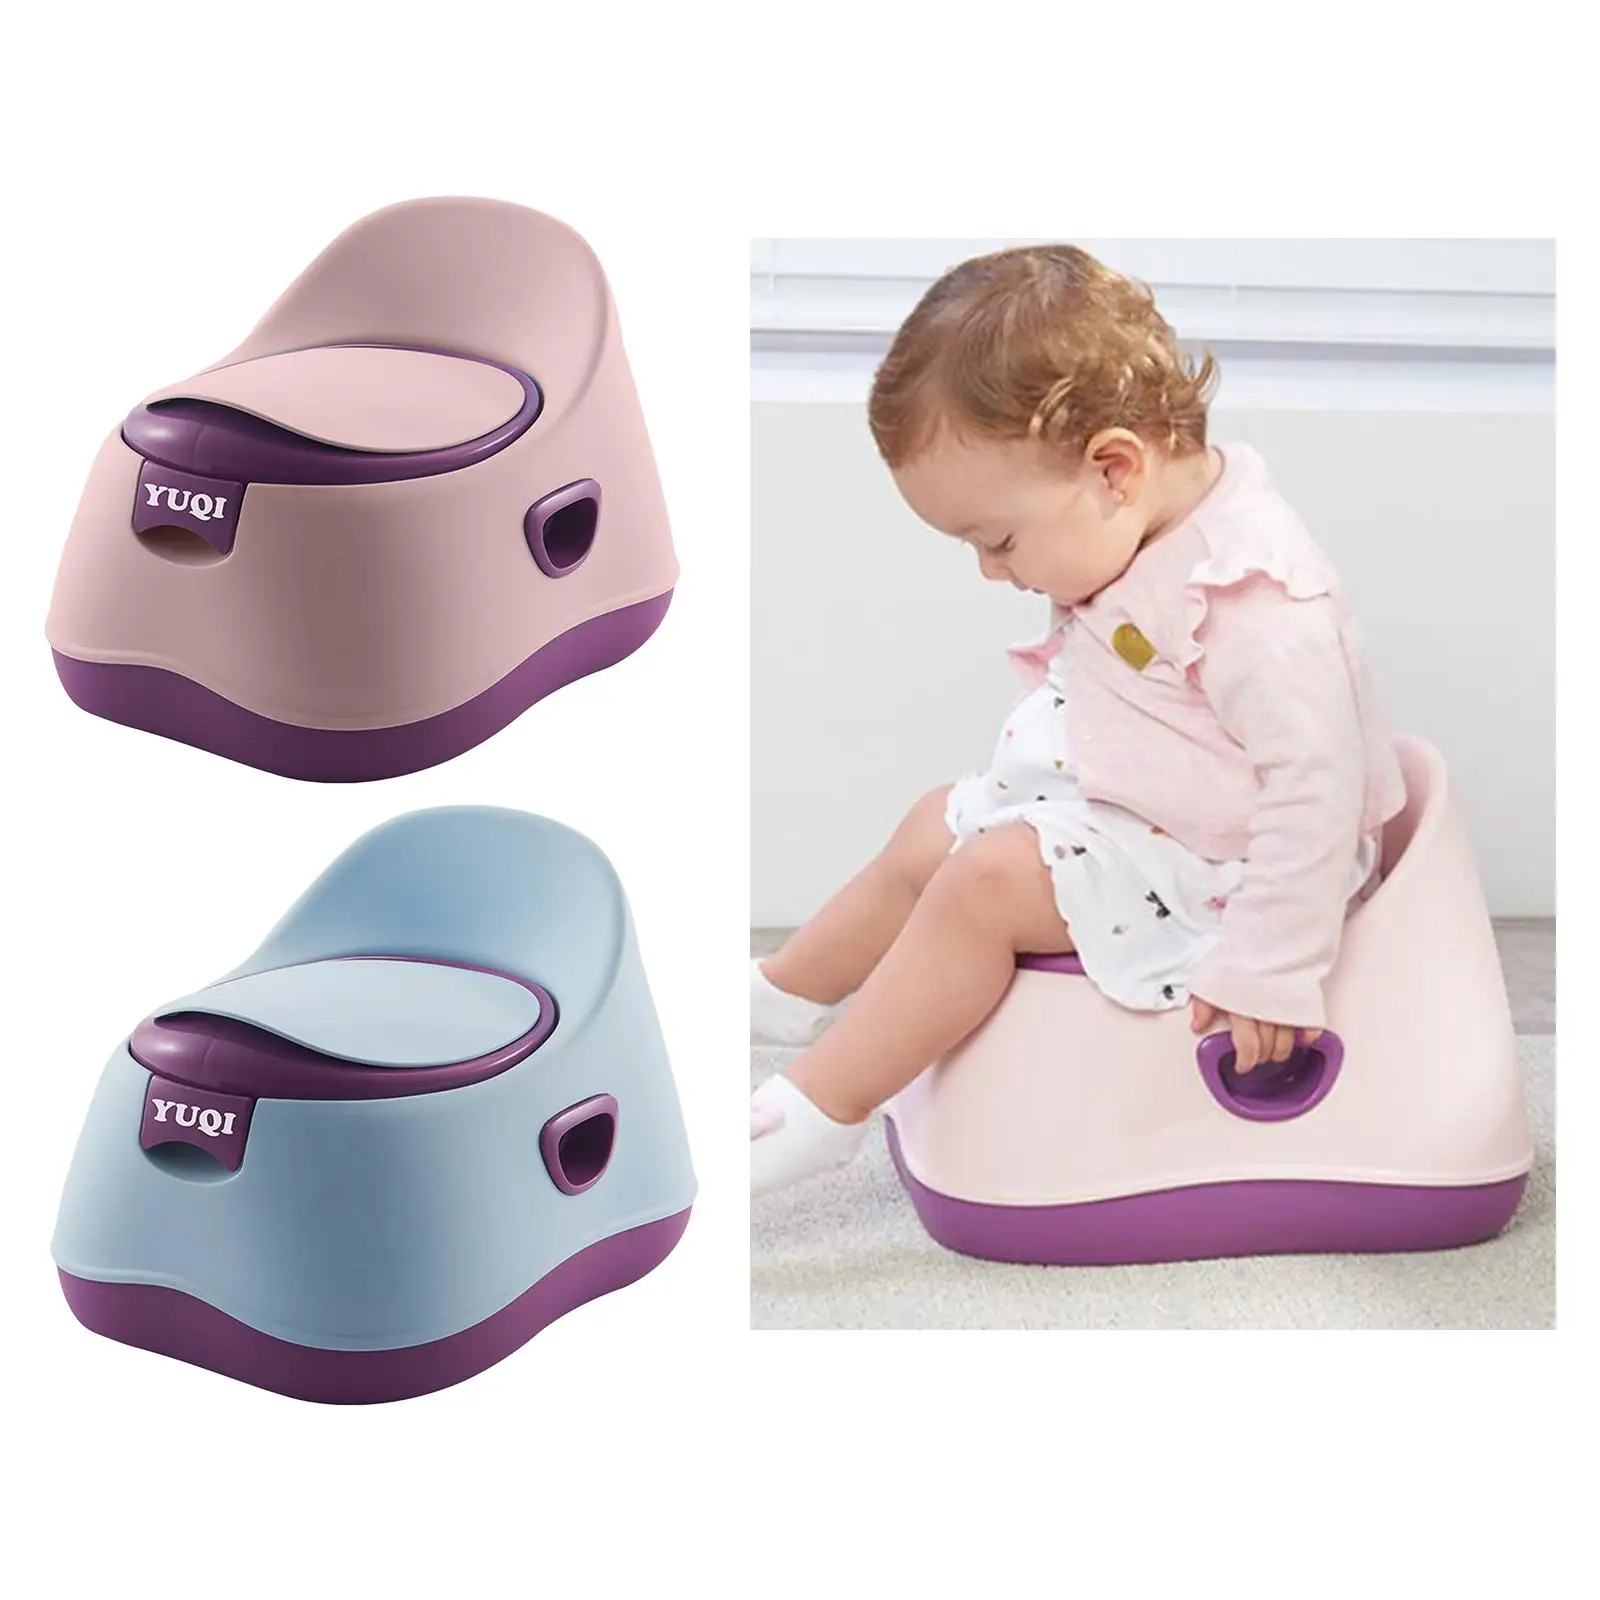 Chair Potty Seat Comfortable Seat Removable Container for Toddler Kids